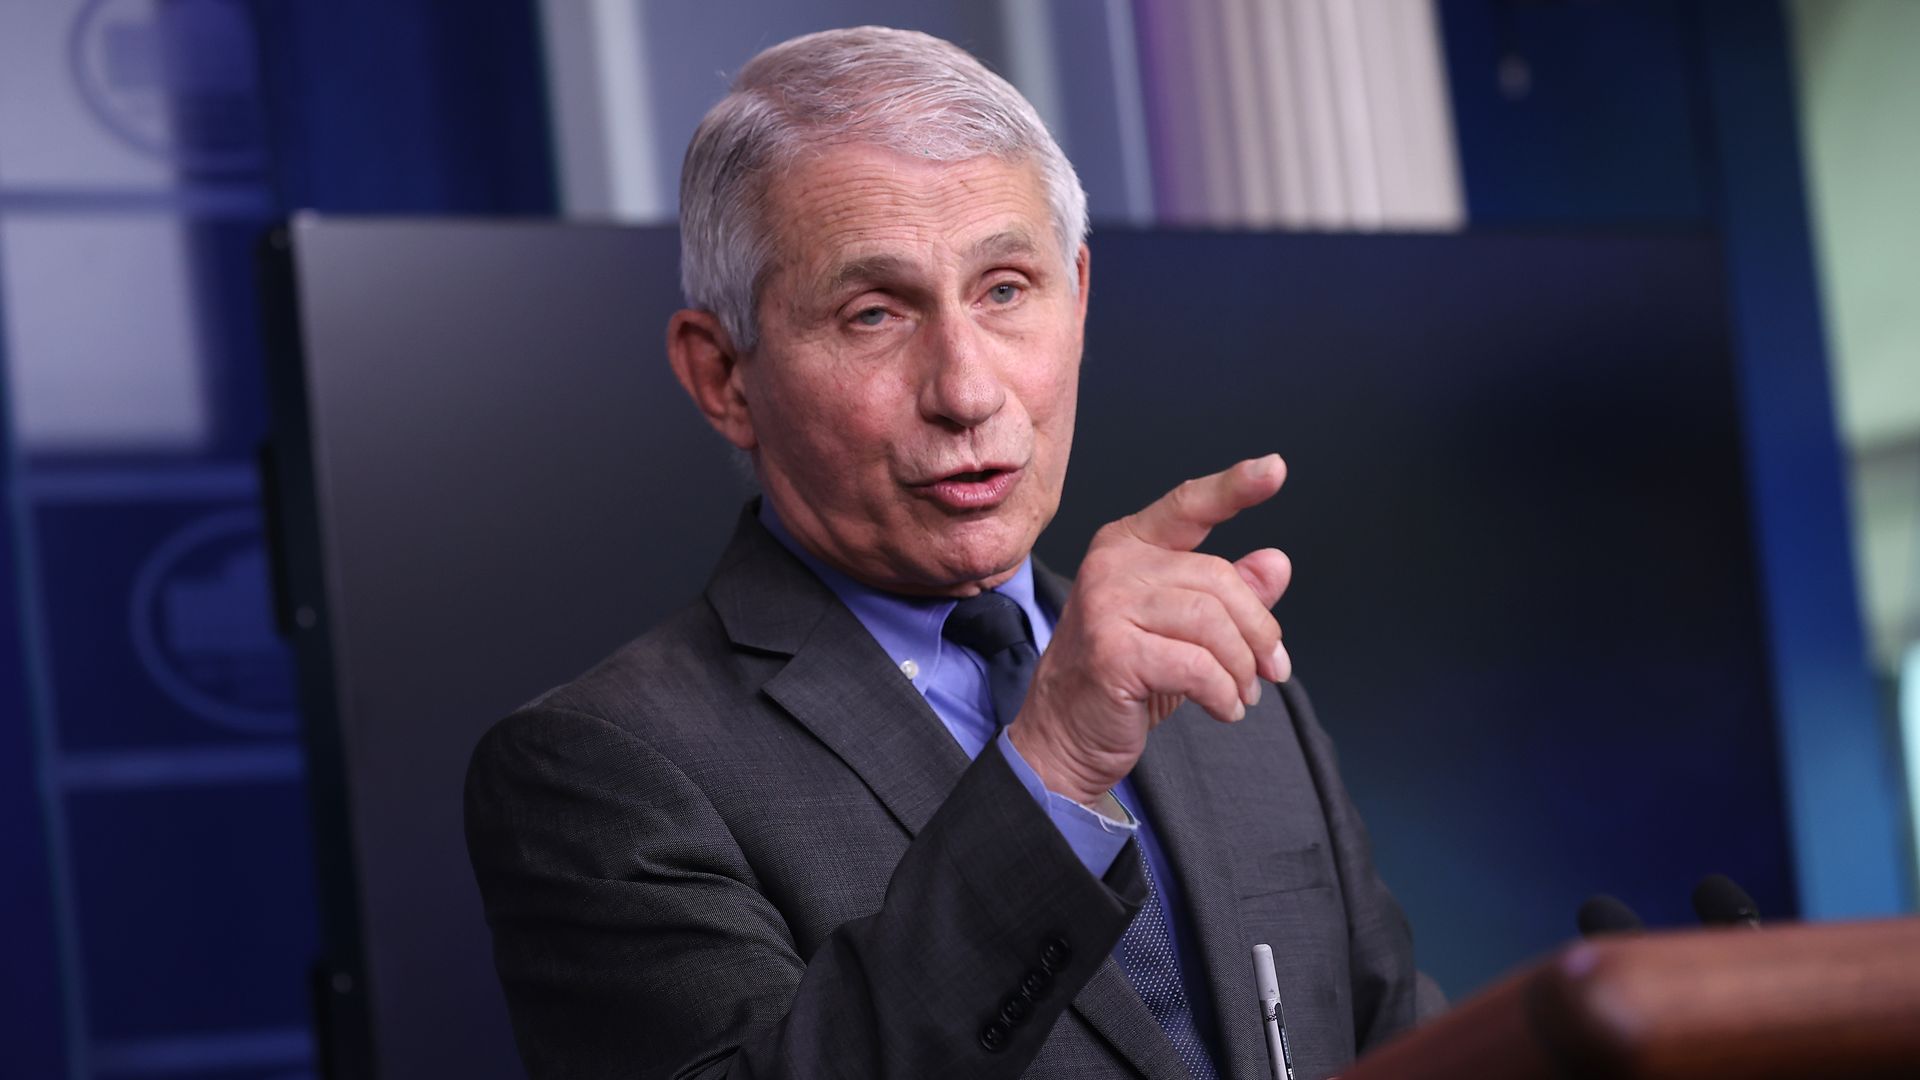 NAID director Anthony Fauci